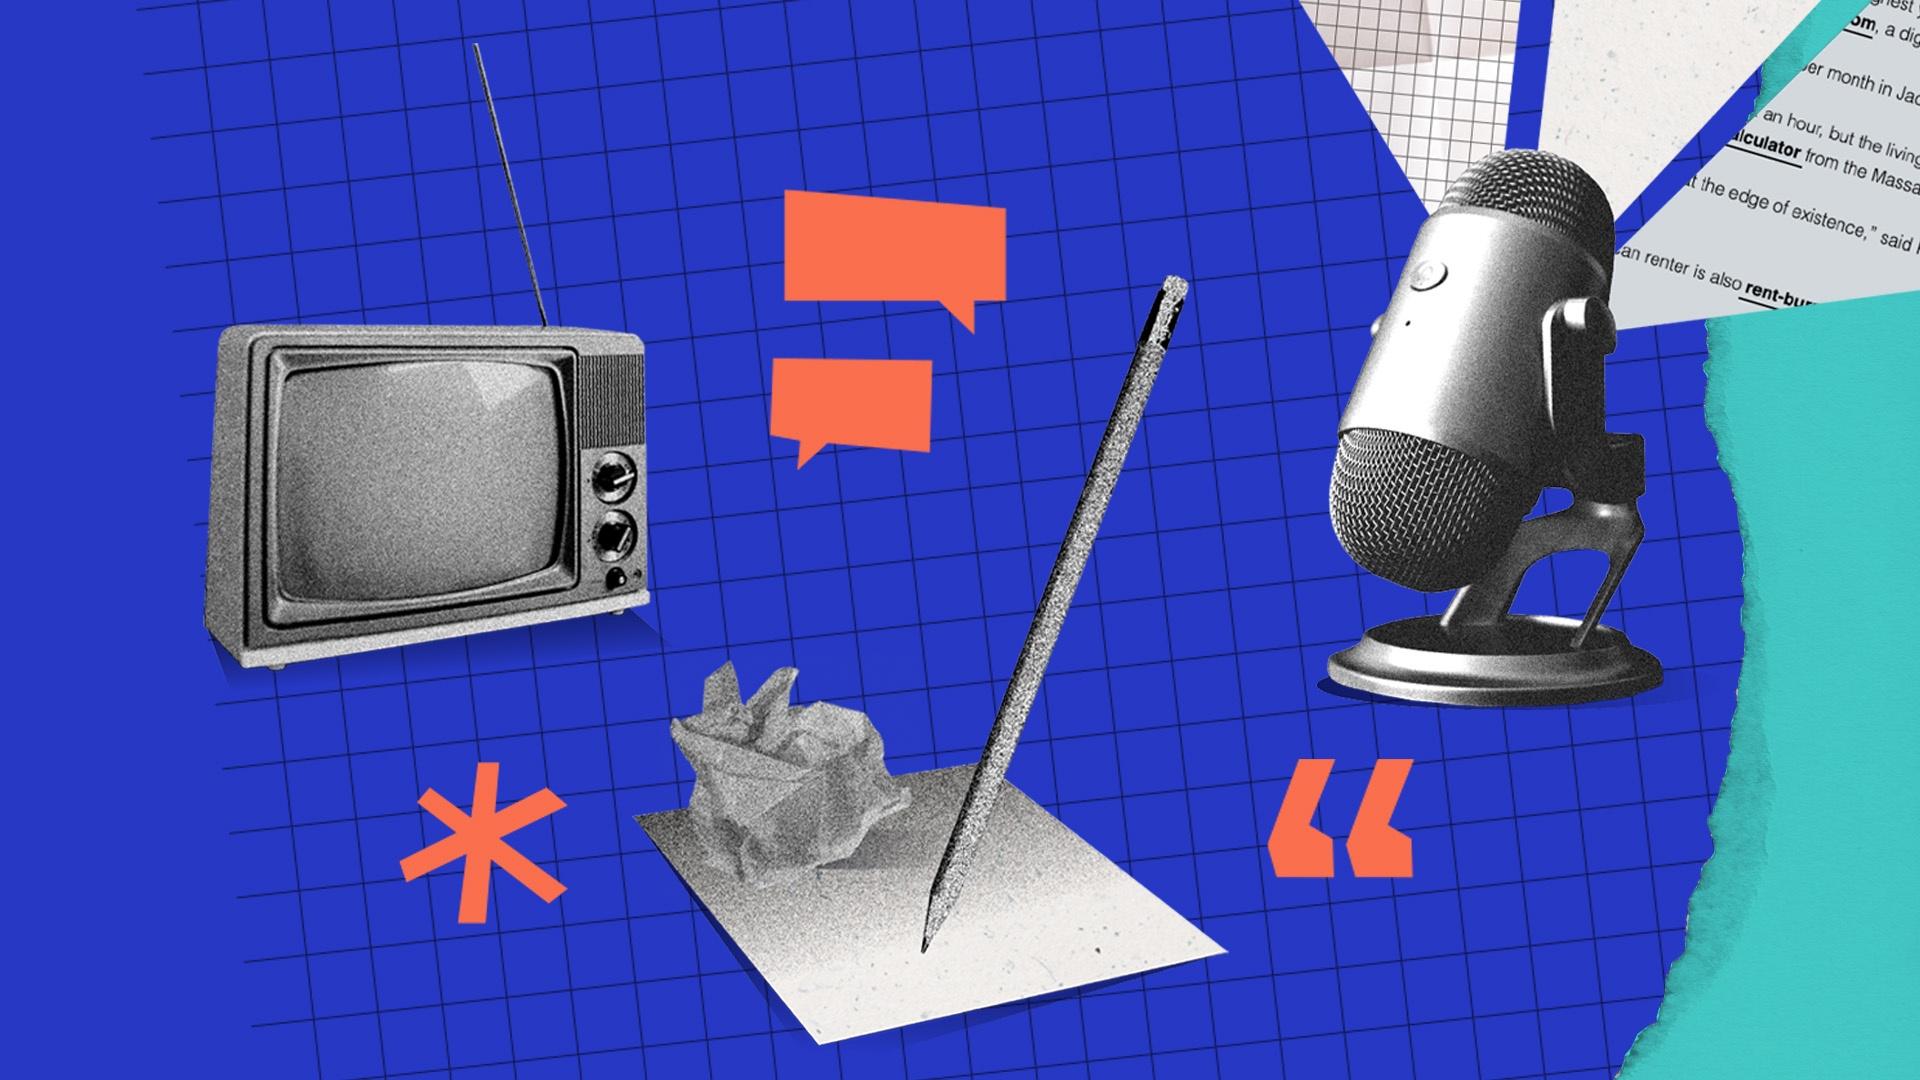 collage of older model TV set, paper and pencil, microphone